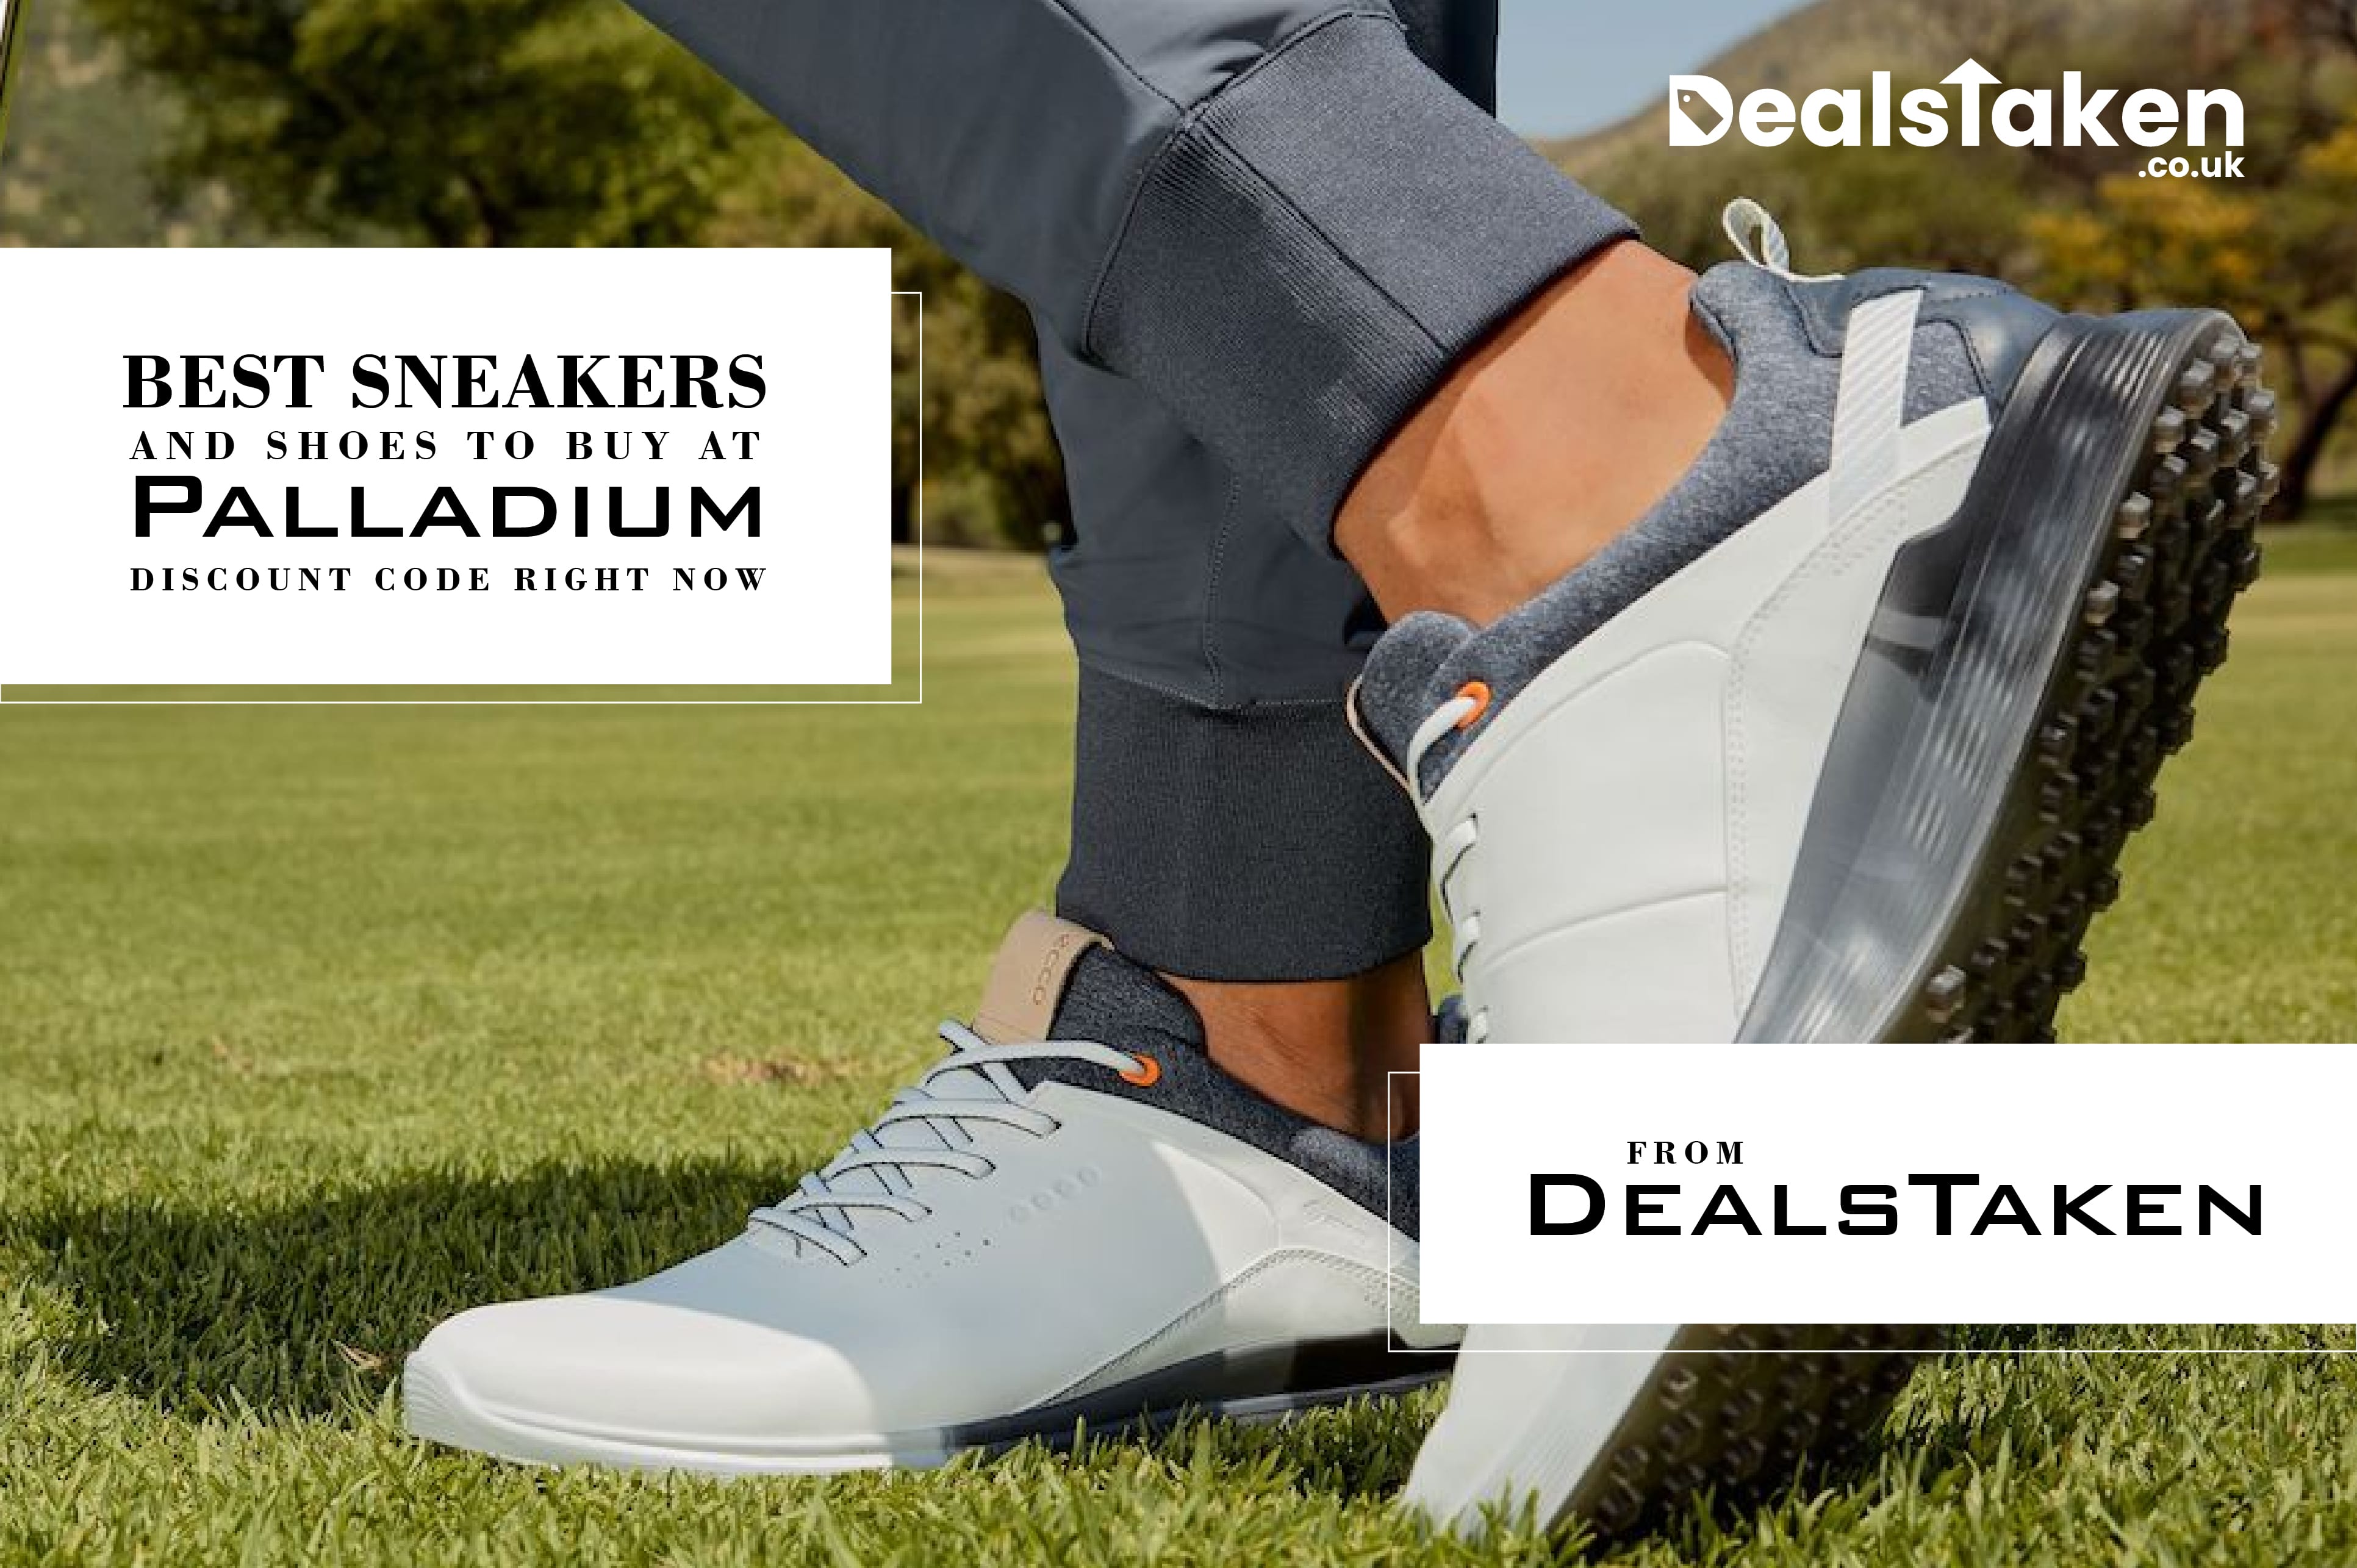 best-sneakers-and-shoes-to-buy-at-palladium-discount-code-right-now-from-dealstaken